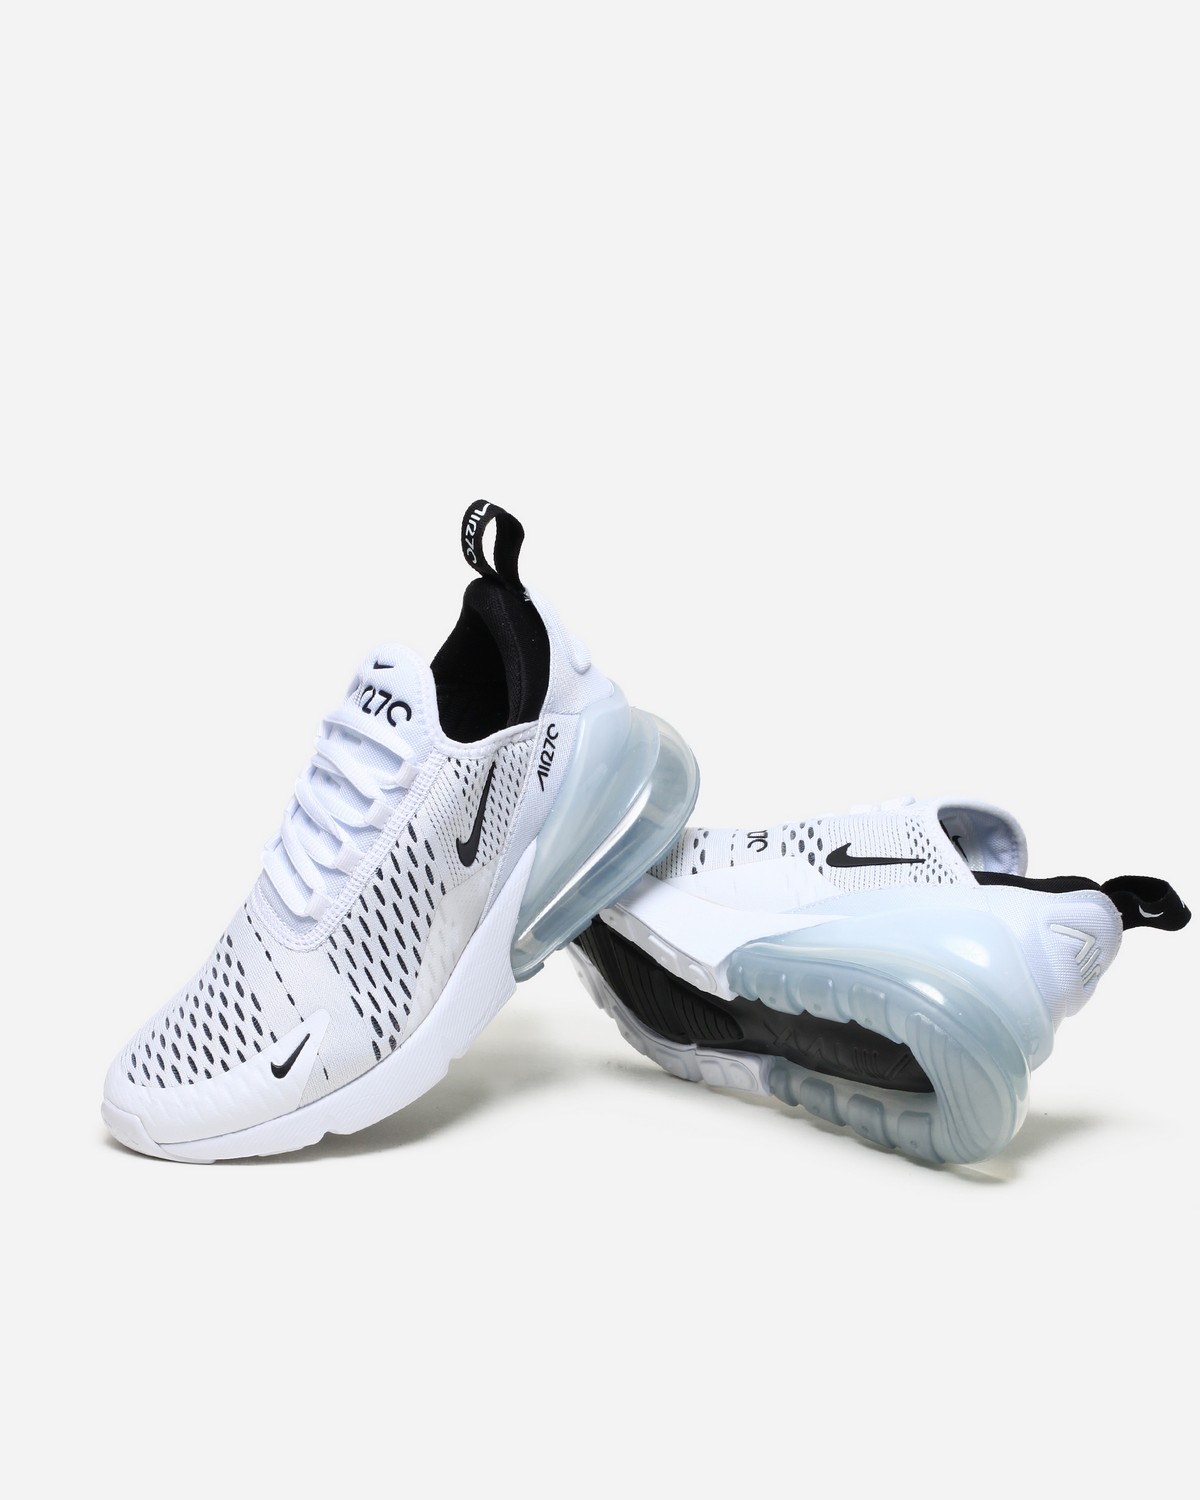 Nike Shows Icy White Air Max 270 For Women1200 x 1500